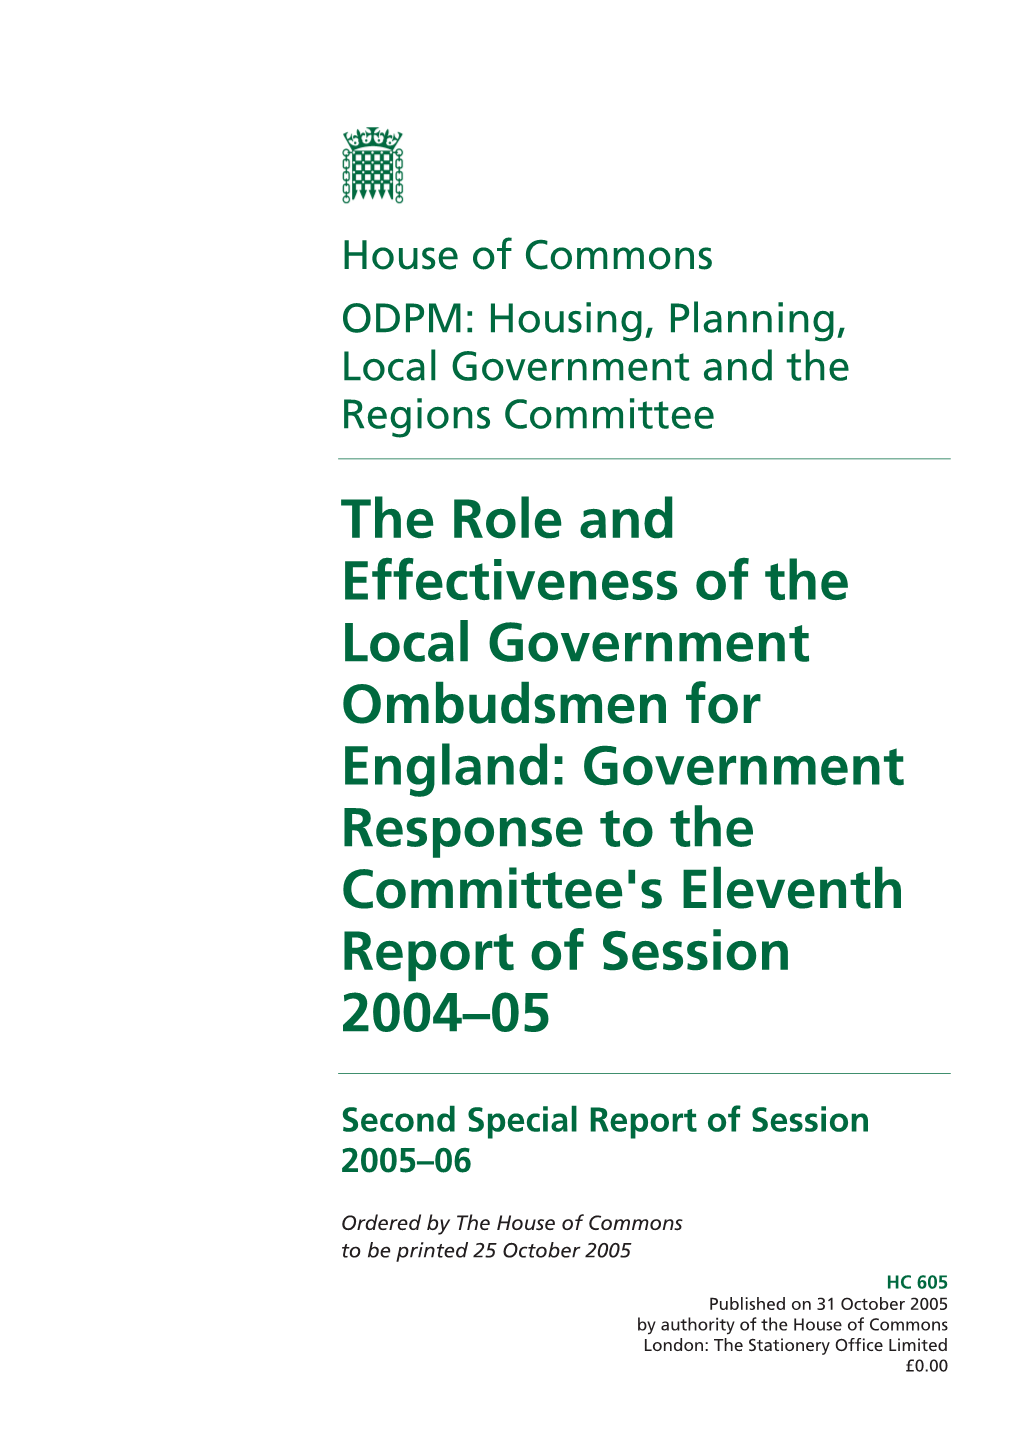 Government Response to the Committee's Eleventh Report of Session 2004–05